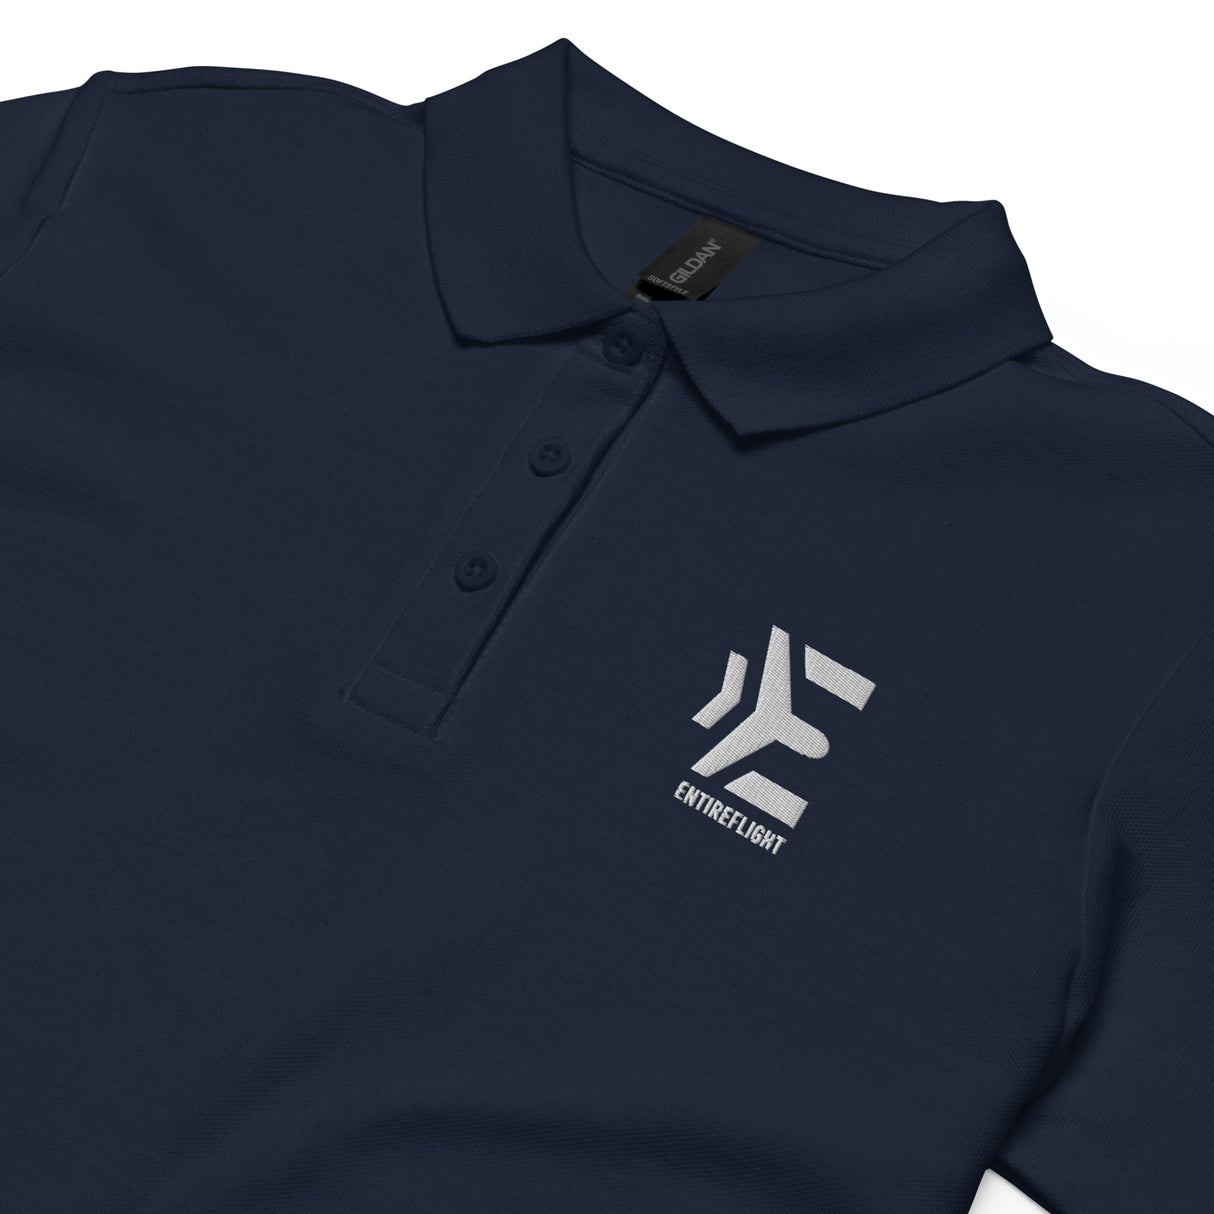 Mills Uniform Company - Ann and Nate Levine Academy - Unisex Cotton/poly  Pique Long-sleeve Polo with logo